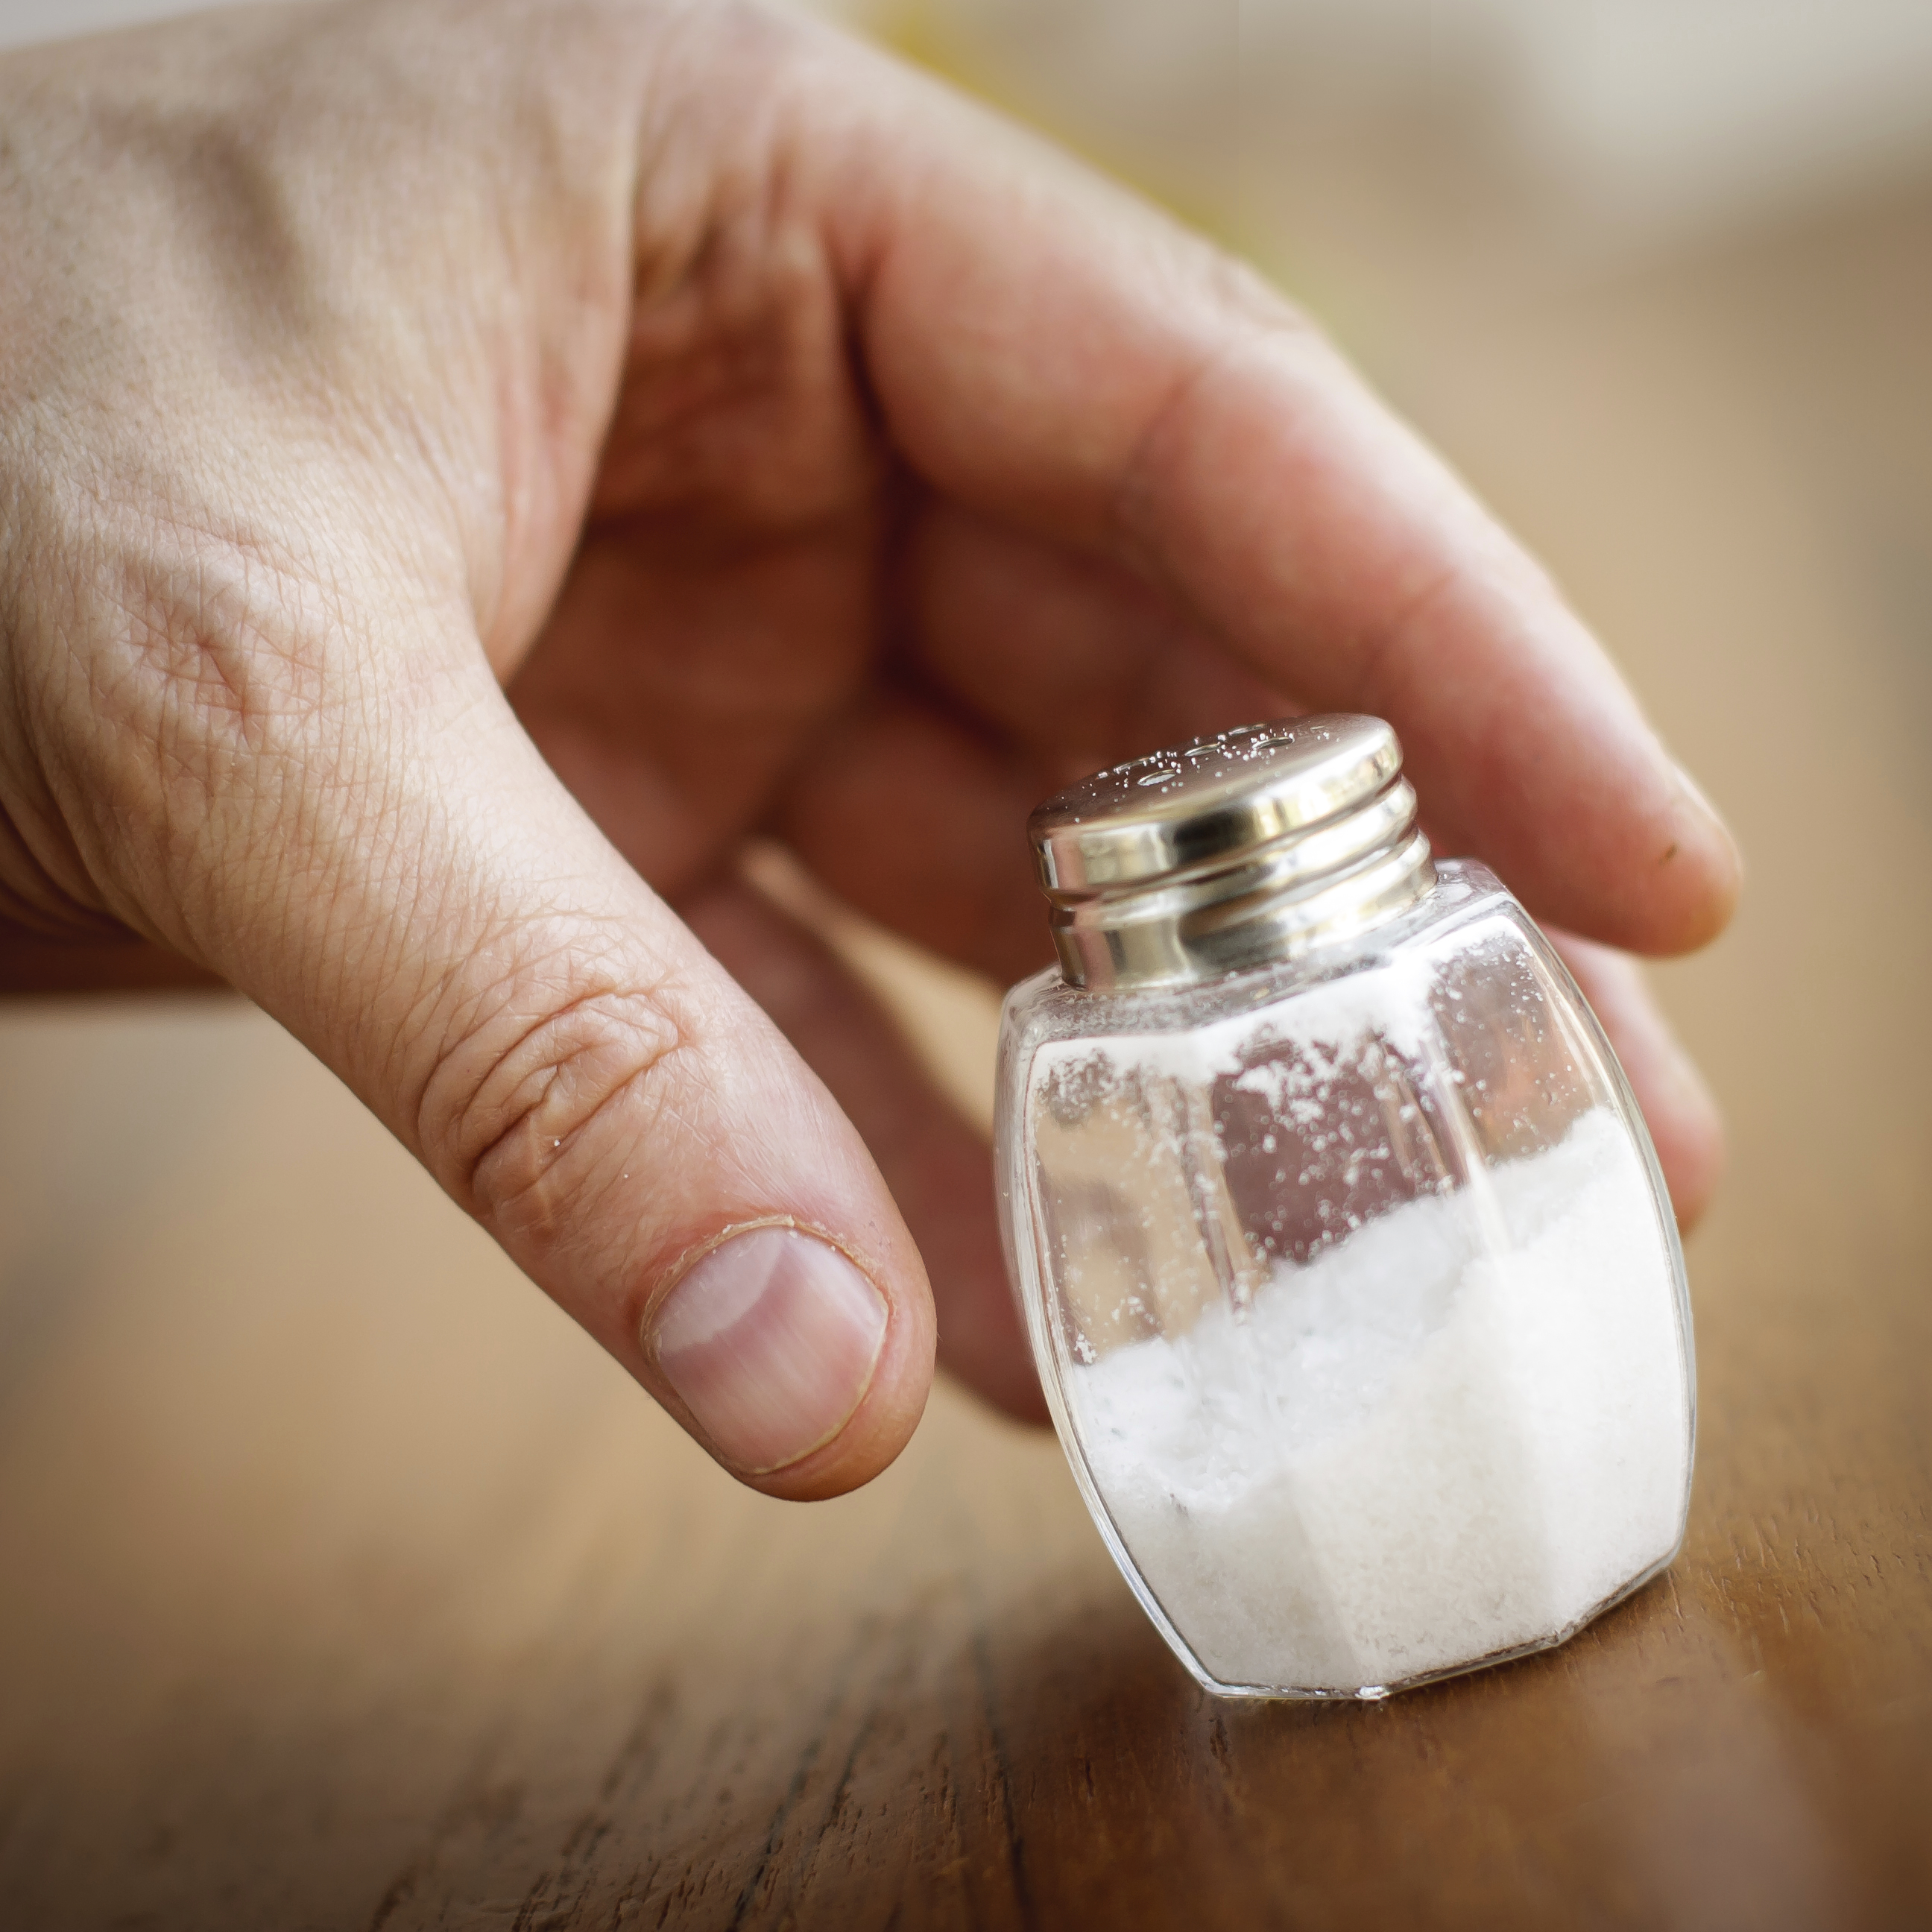 Healthy Habits: All About Salt